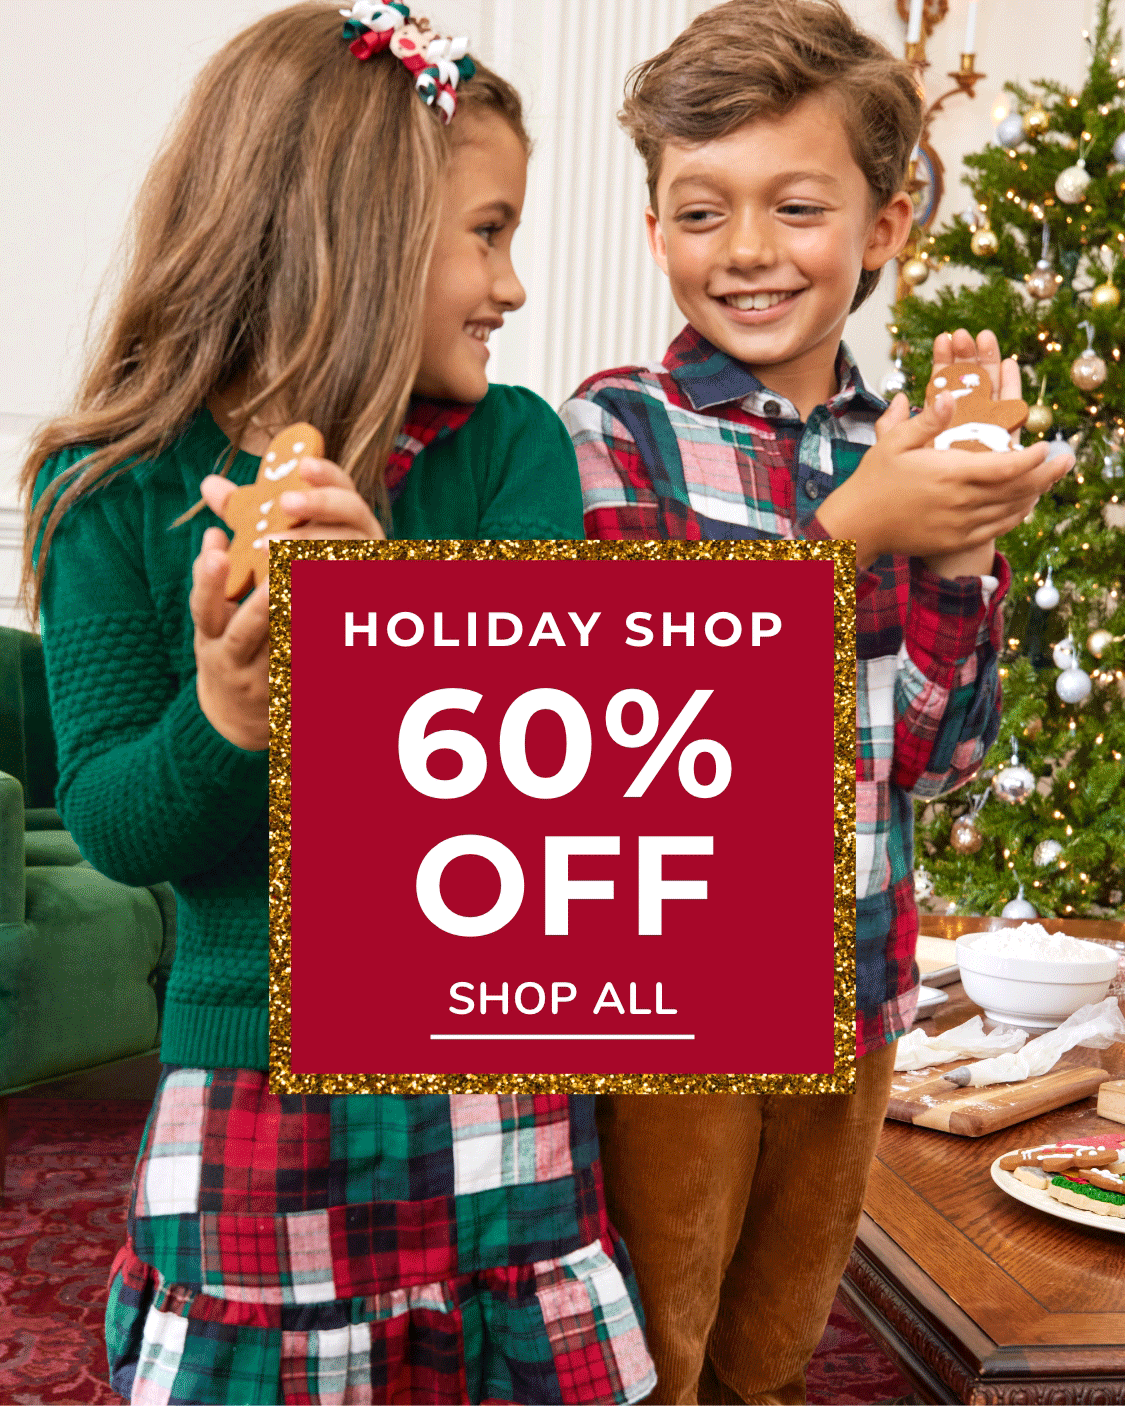 The Holiday Shop 60% Off